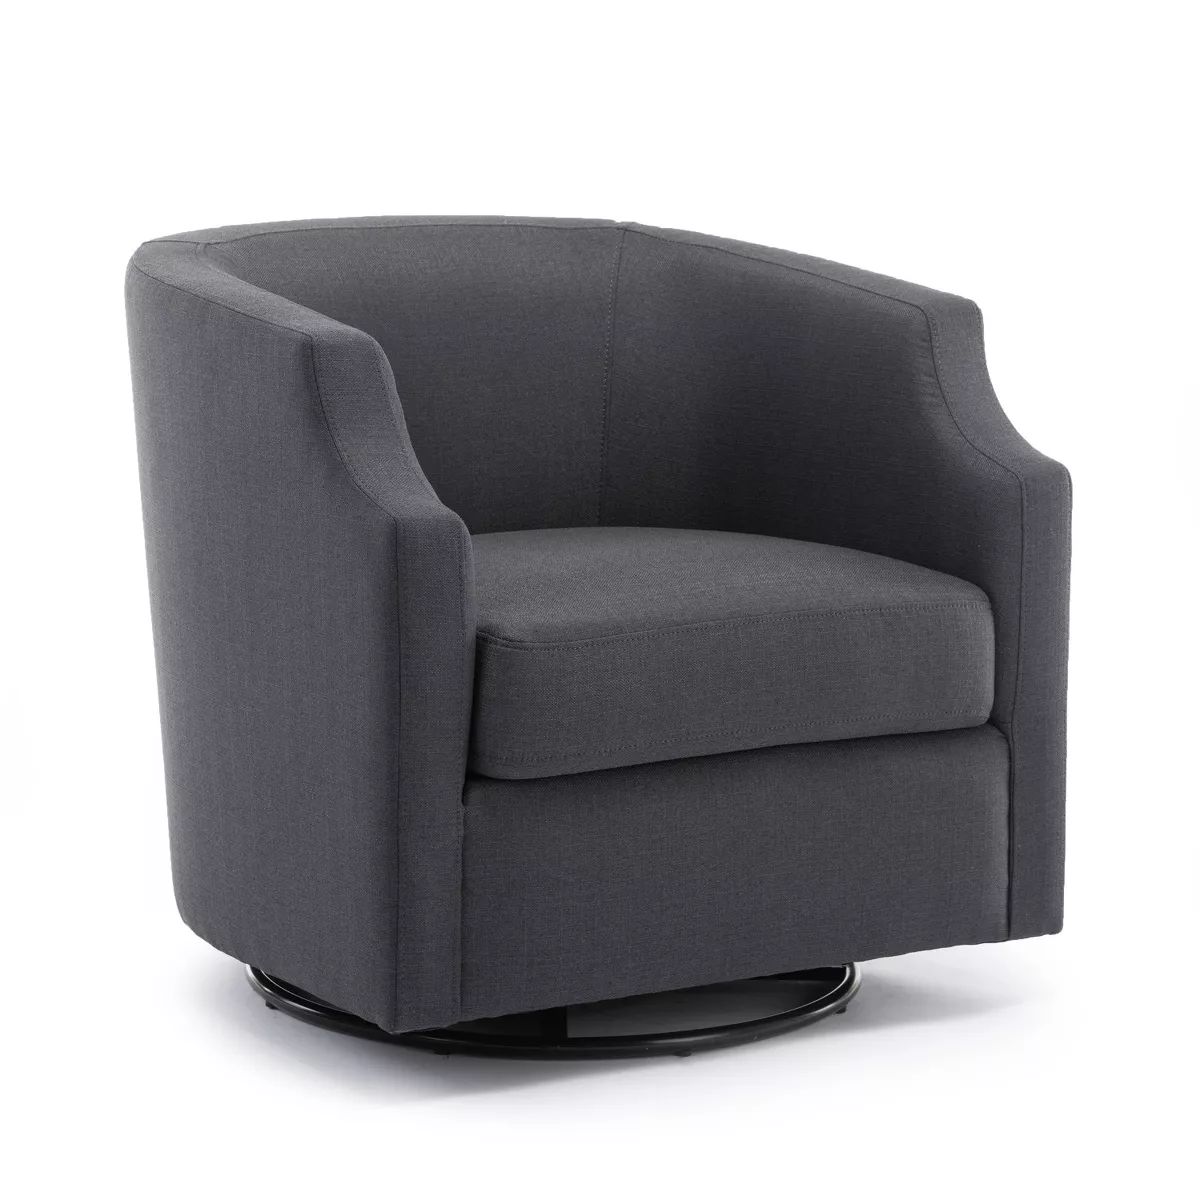 Comfort Pointe Infinity Swivel Glider Barrel Accent Chair | Target